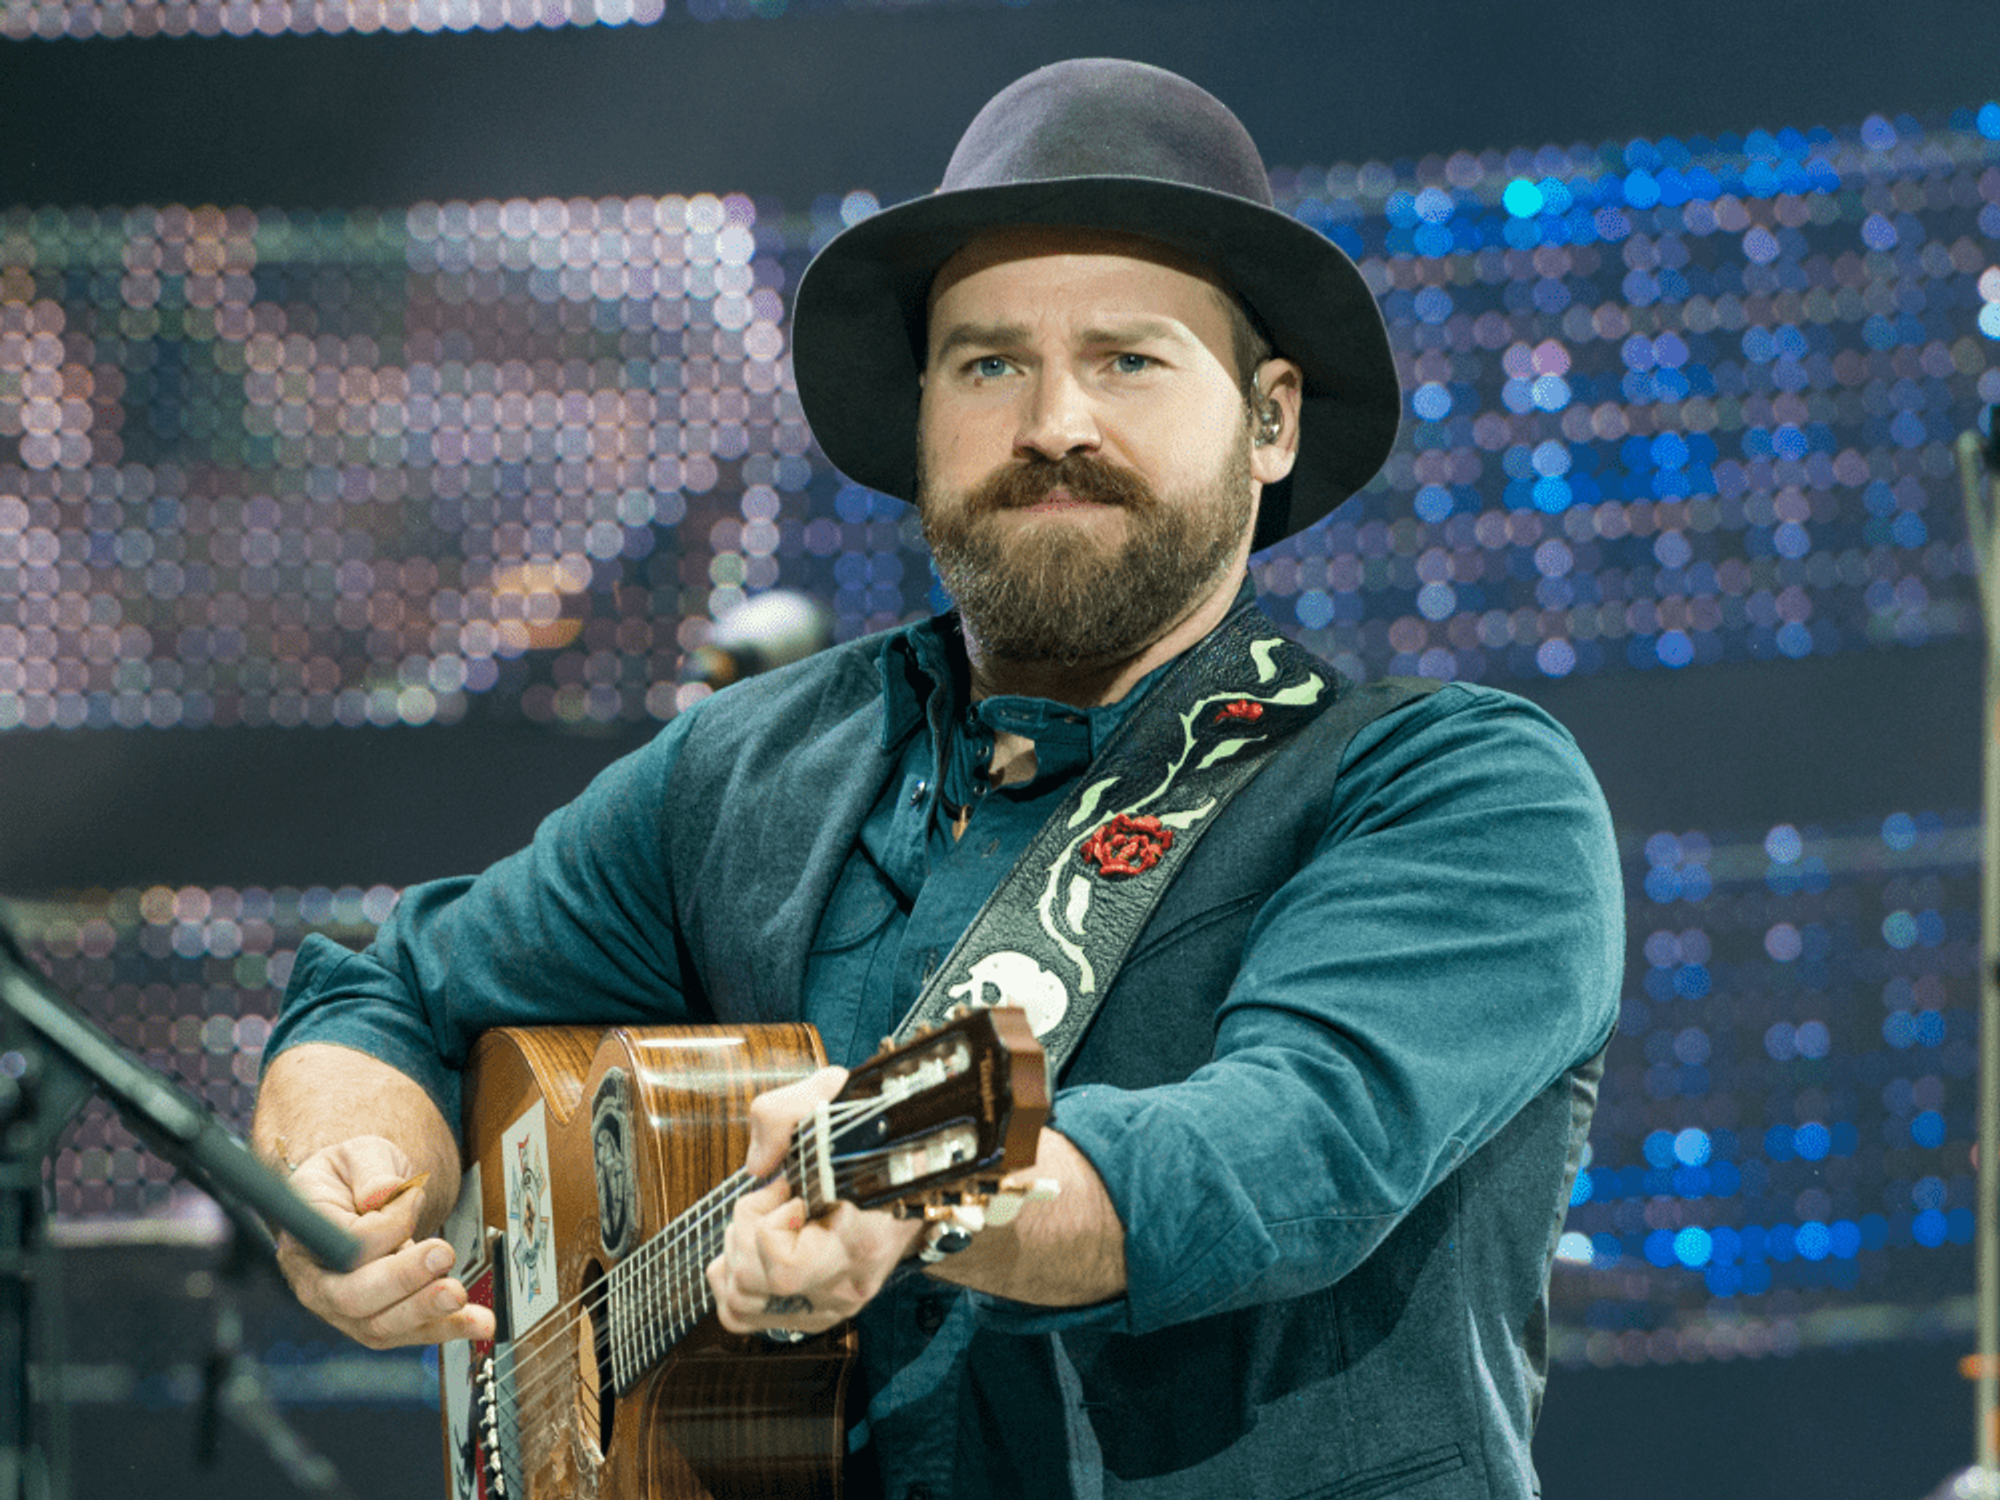 A hat created the biggest buzz Zac Brown Band's Houston Rodeo concert.